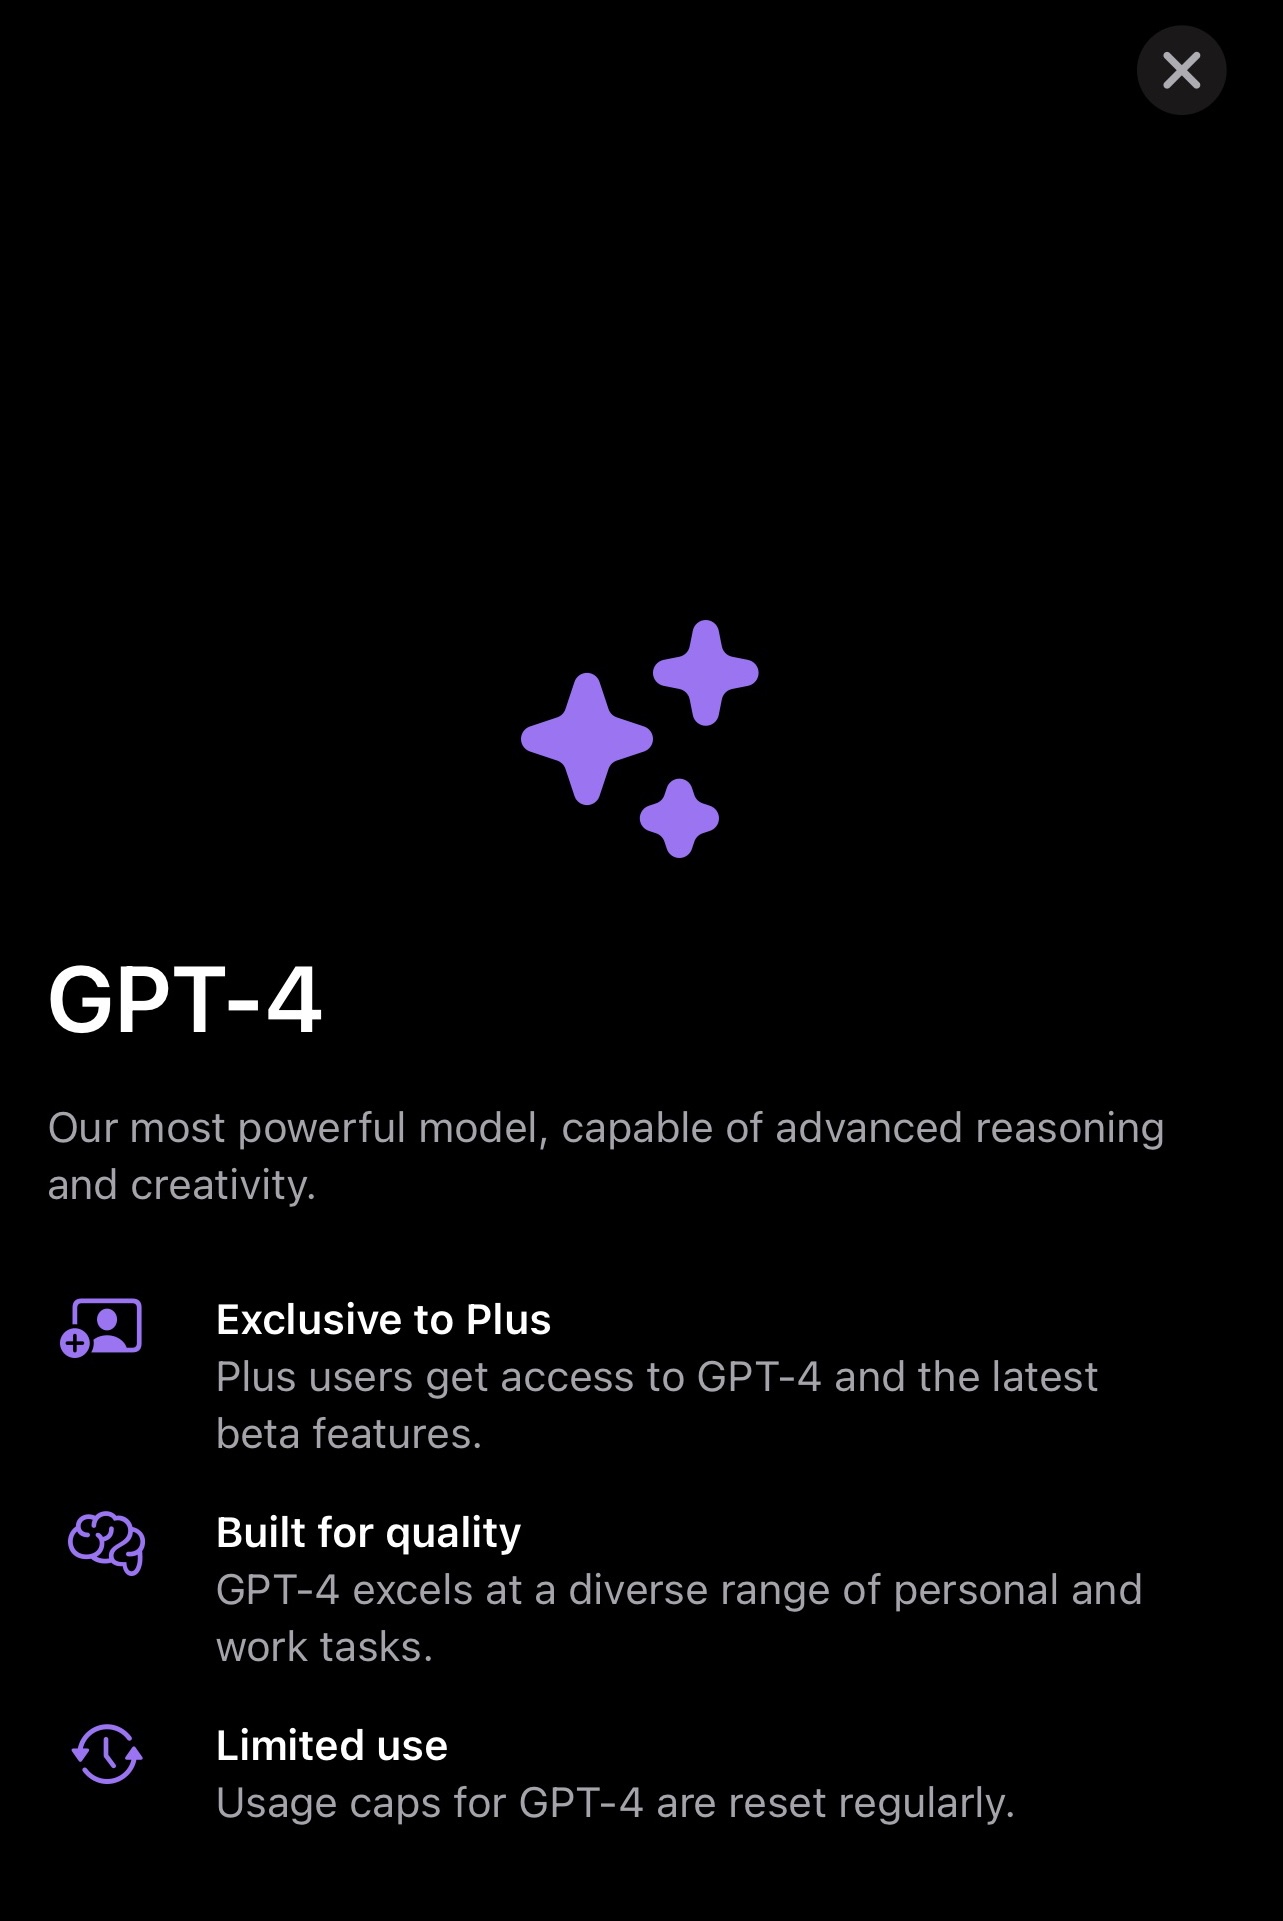 official openai chatgpt app ios iphone 3 646671c694f96 sej - A Look Inside The New ChatGPT iPhone App From OpenAI